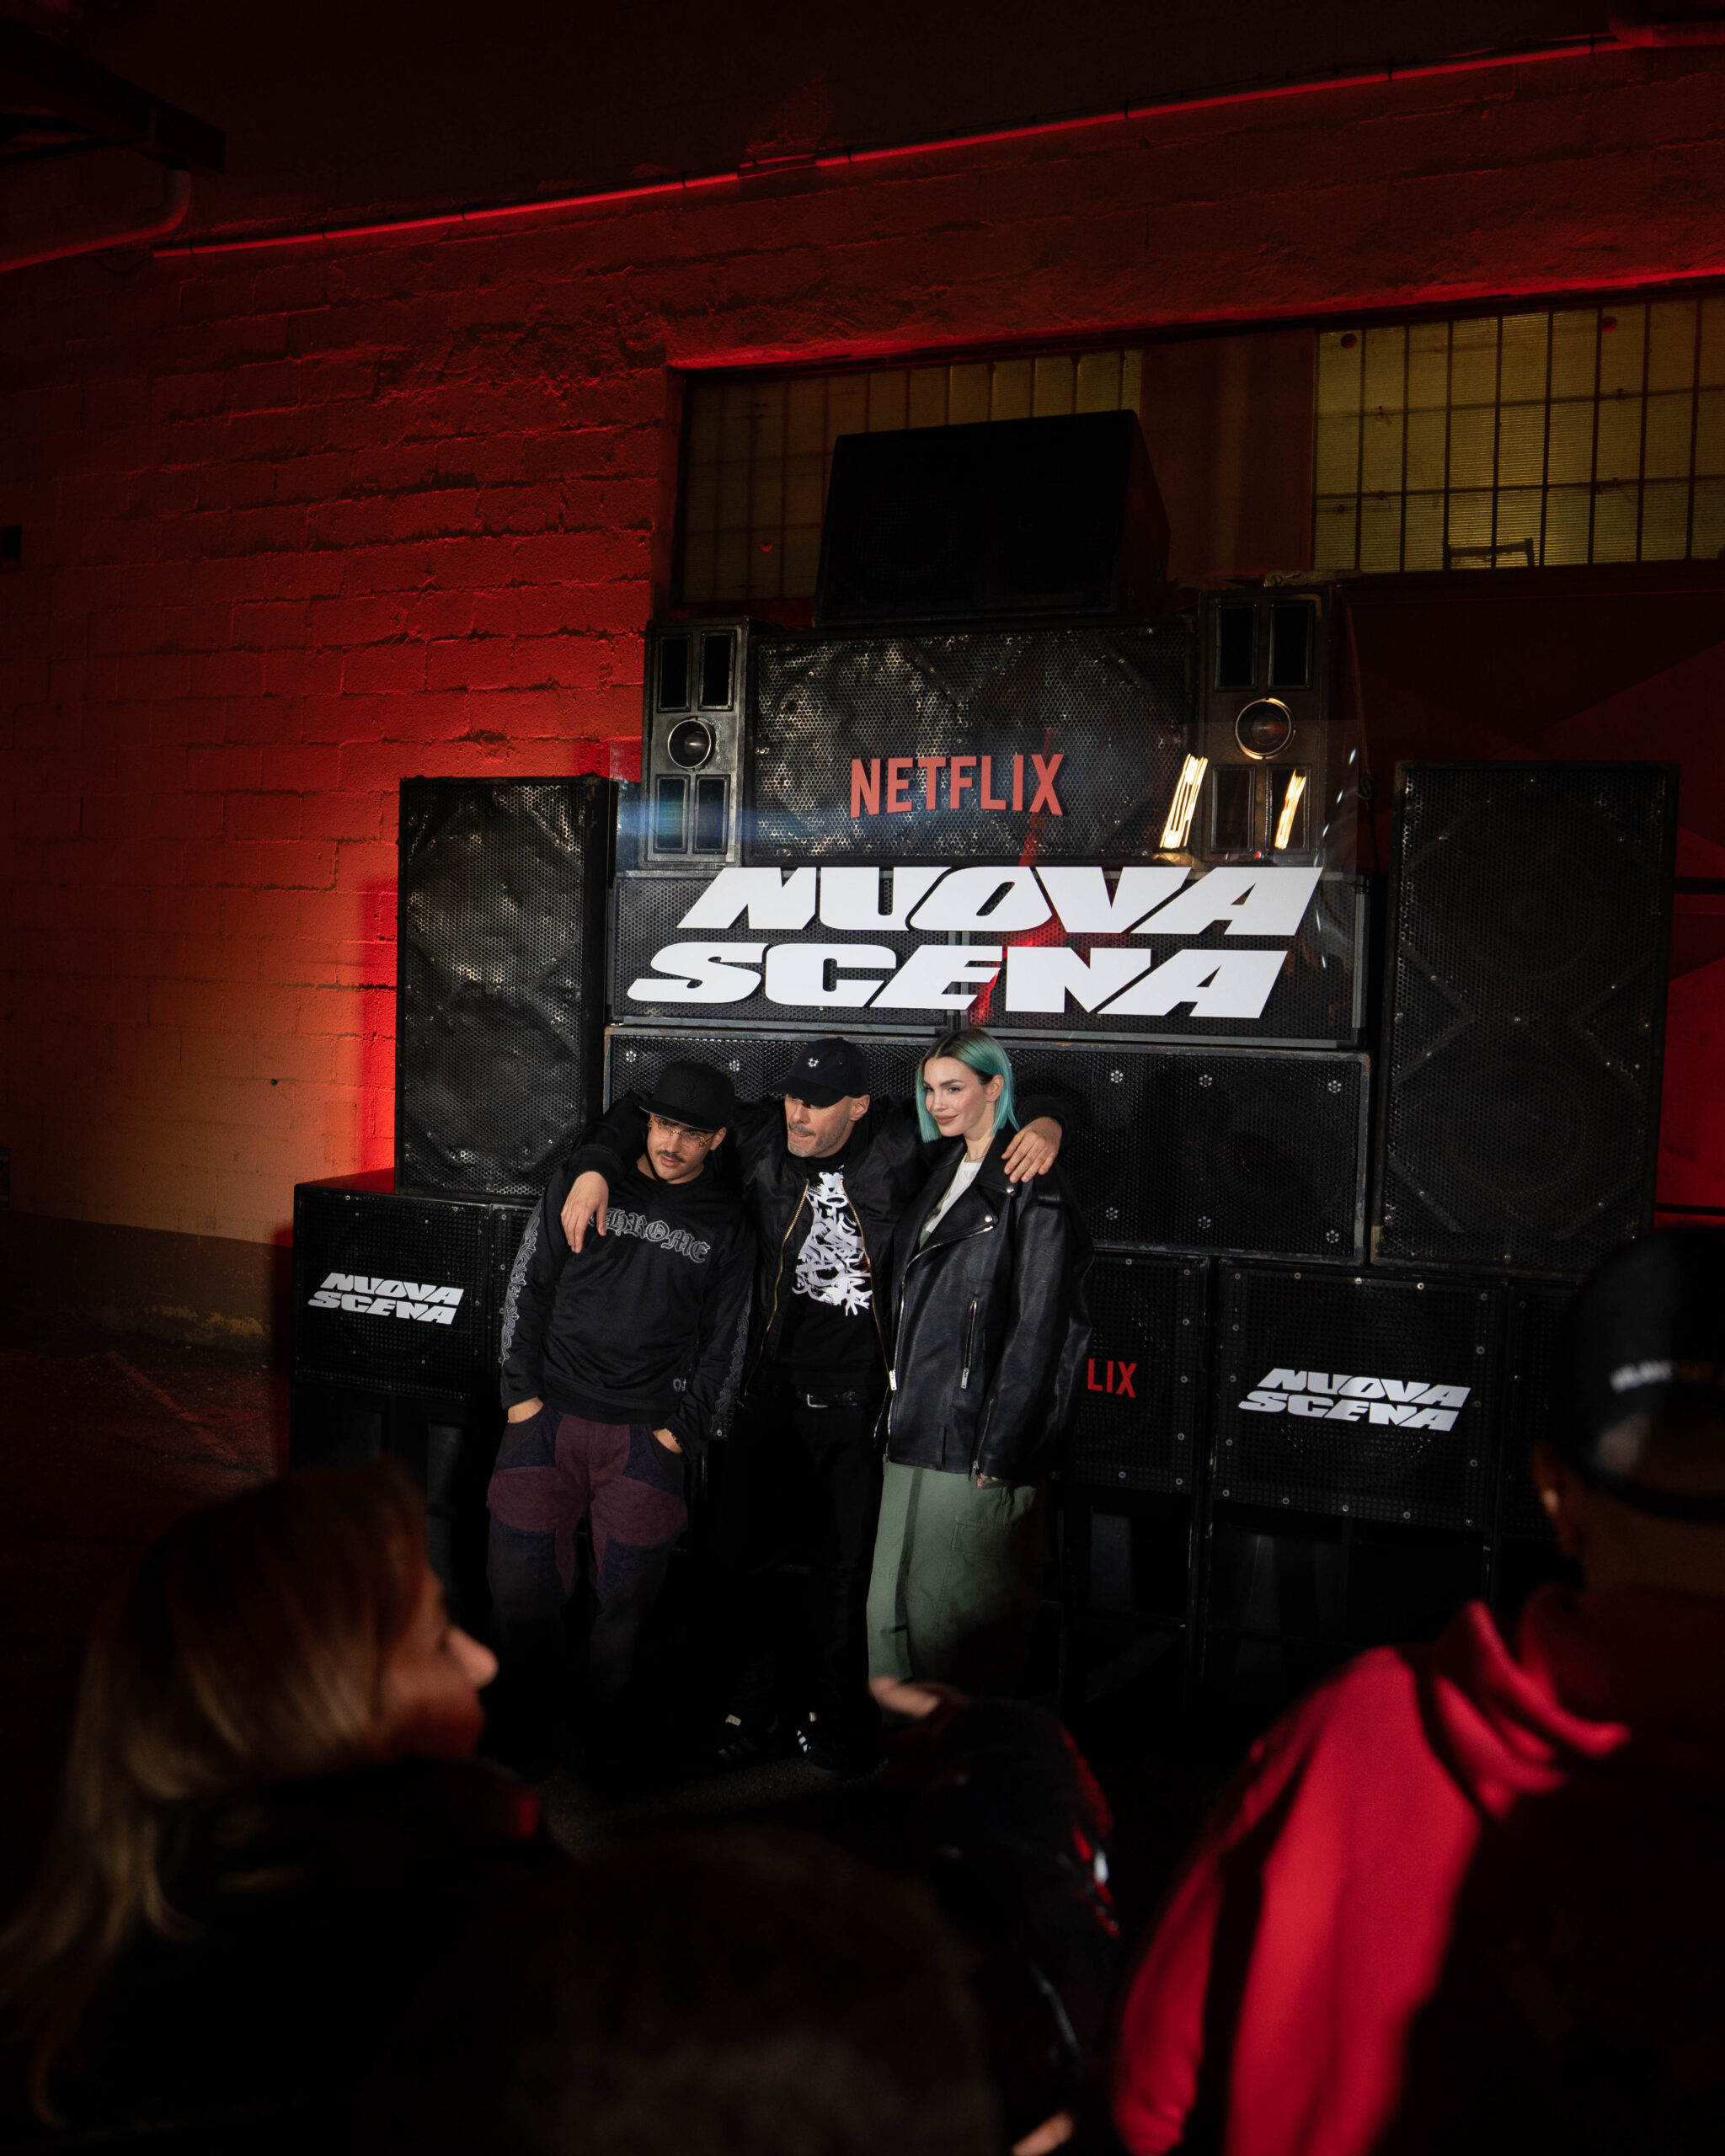 LaTarma Entertainment on the launch party of “Nuova Scena”, the new Netflix rap show.